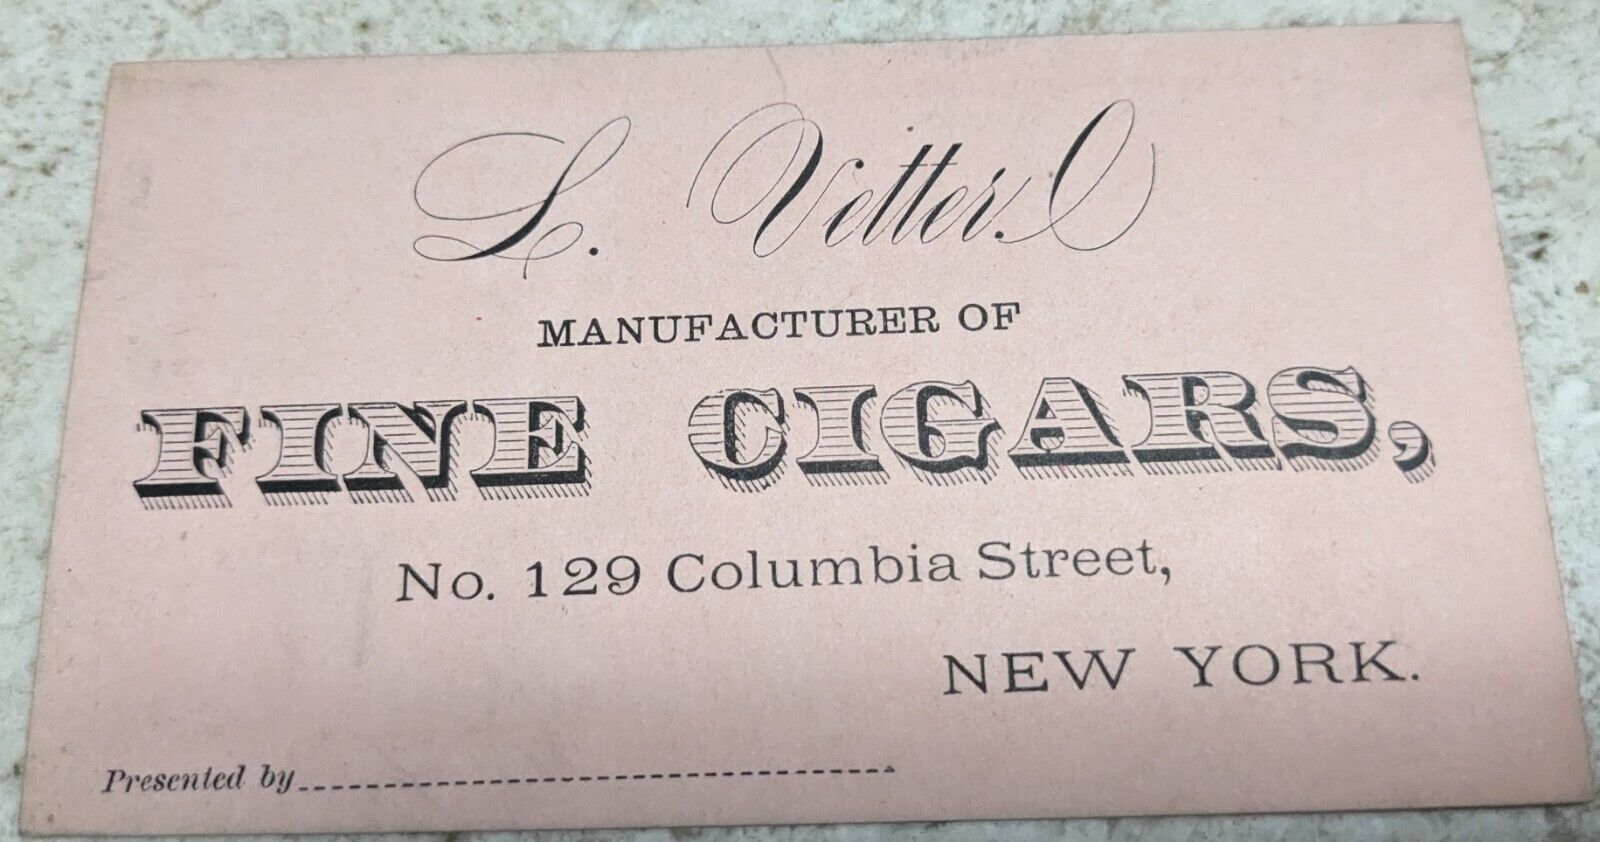 *RARE* 1860'S L. VETTERL MANUFACTURES OF FINE CIGARS COLUMBIA ST. NYC NY